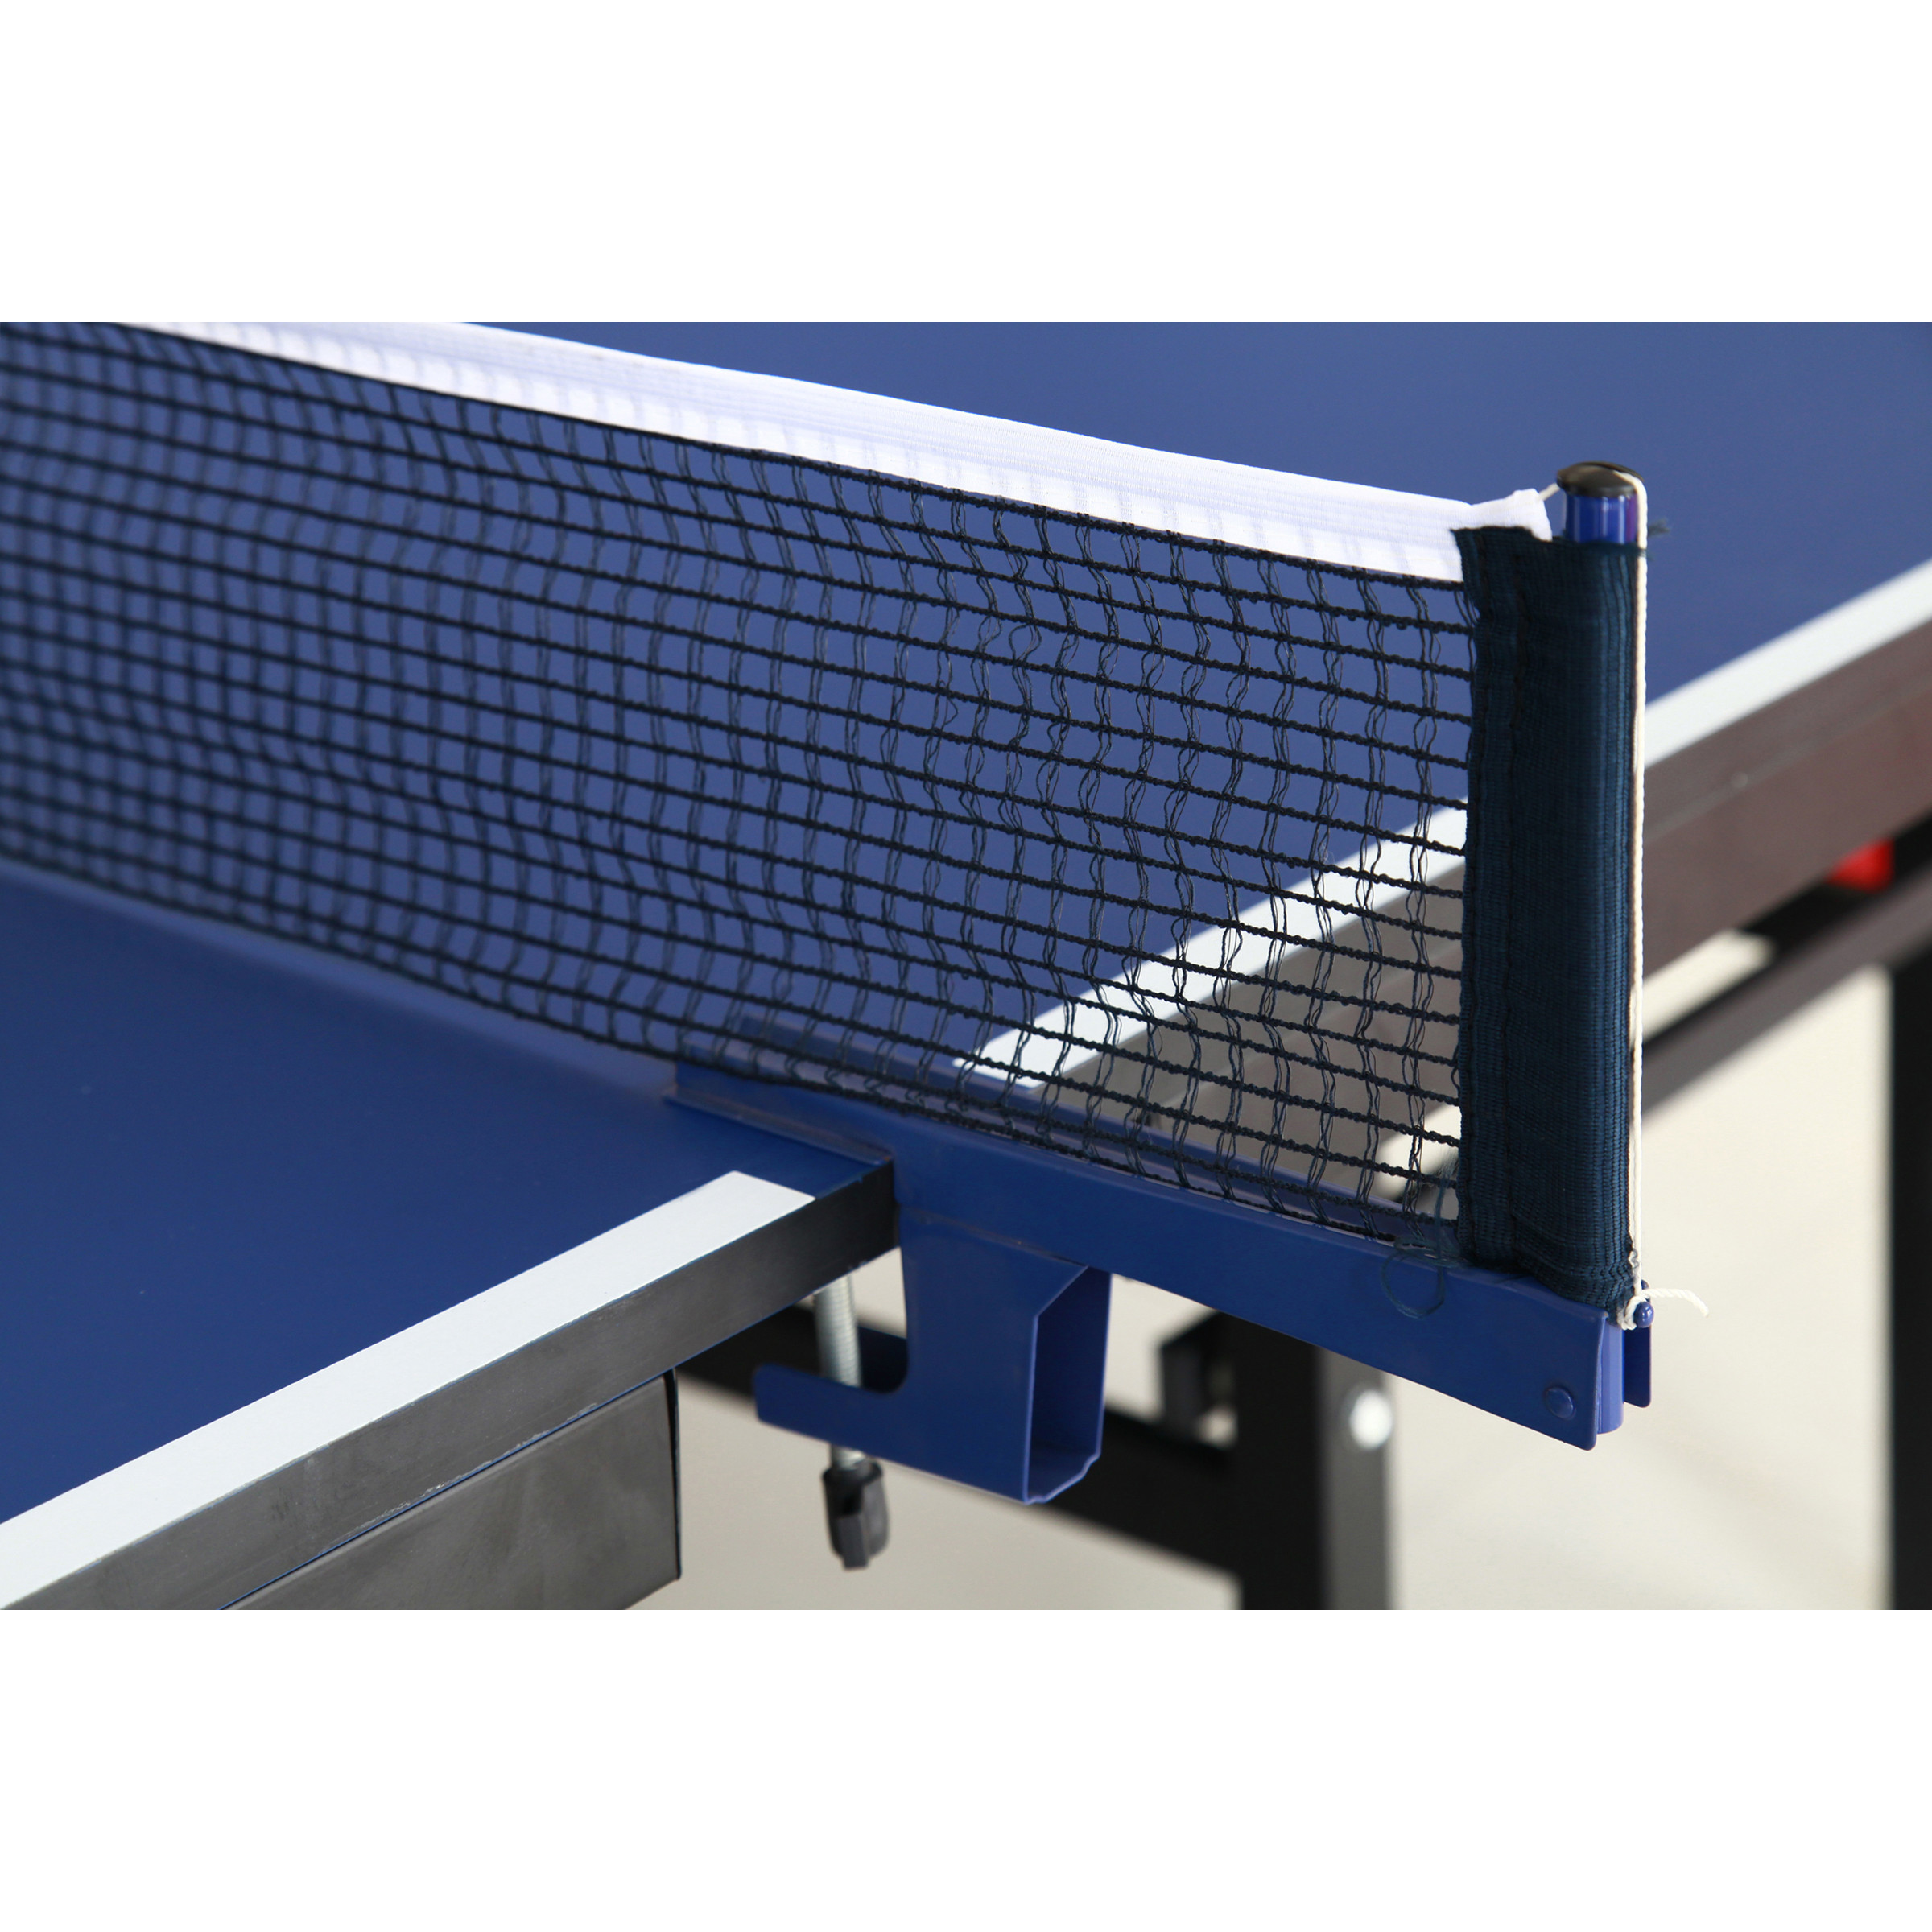 Hathaway Victory 25mm Table Tennis Table w/Two Carriage Transport, Blue - image 3 of 12